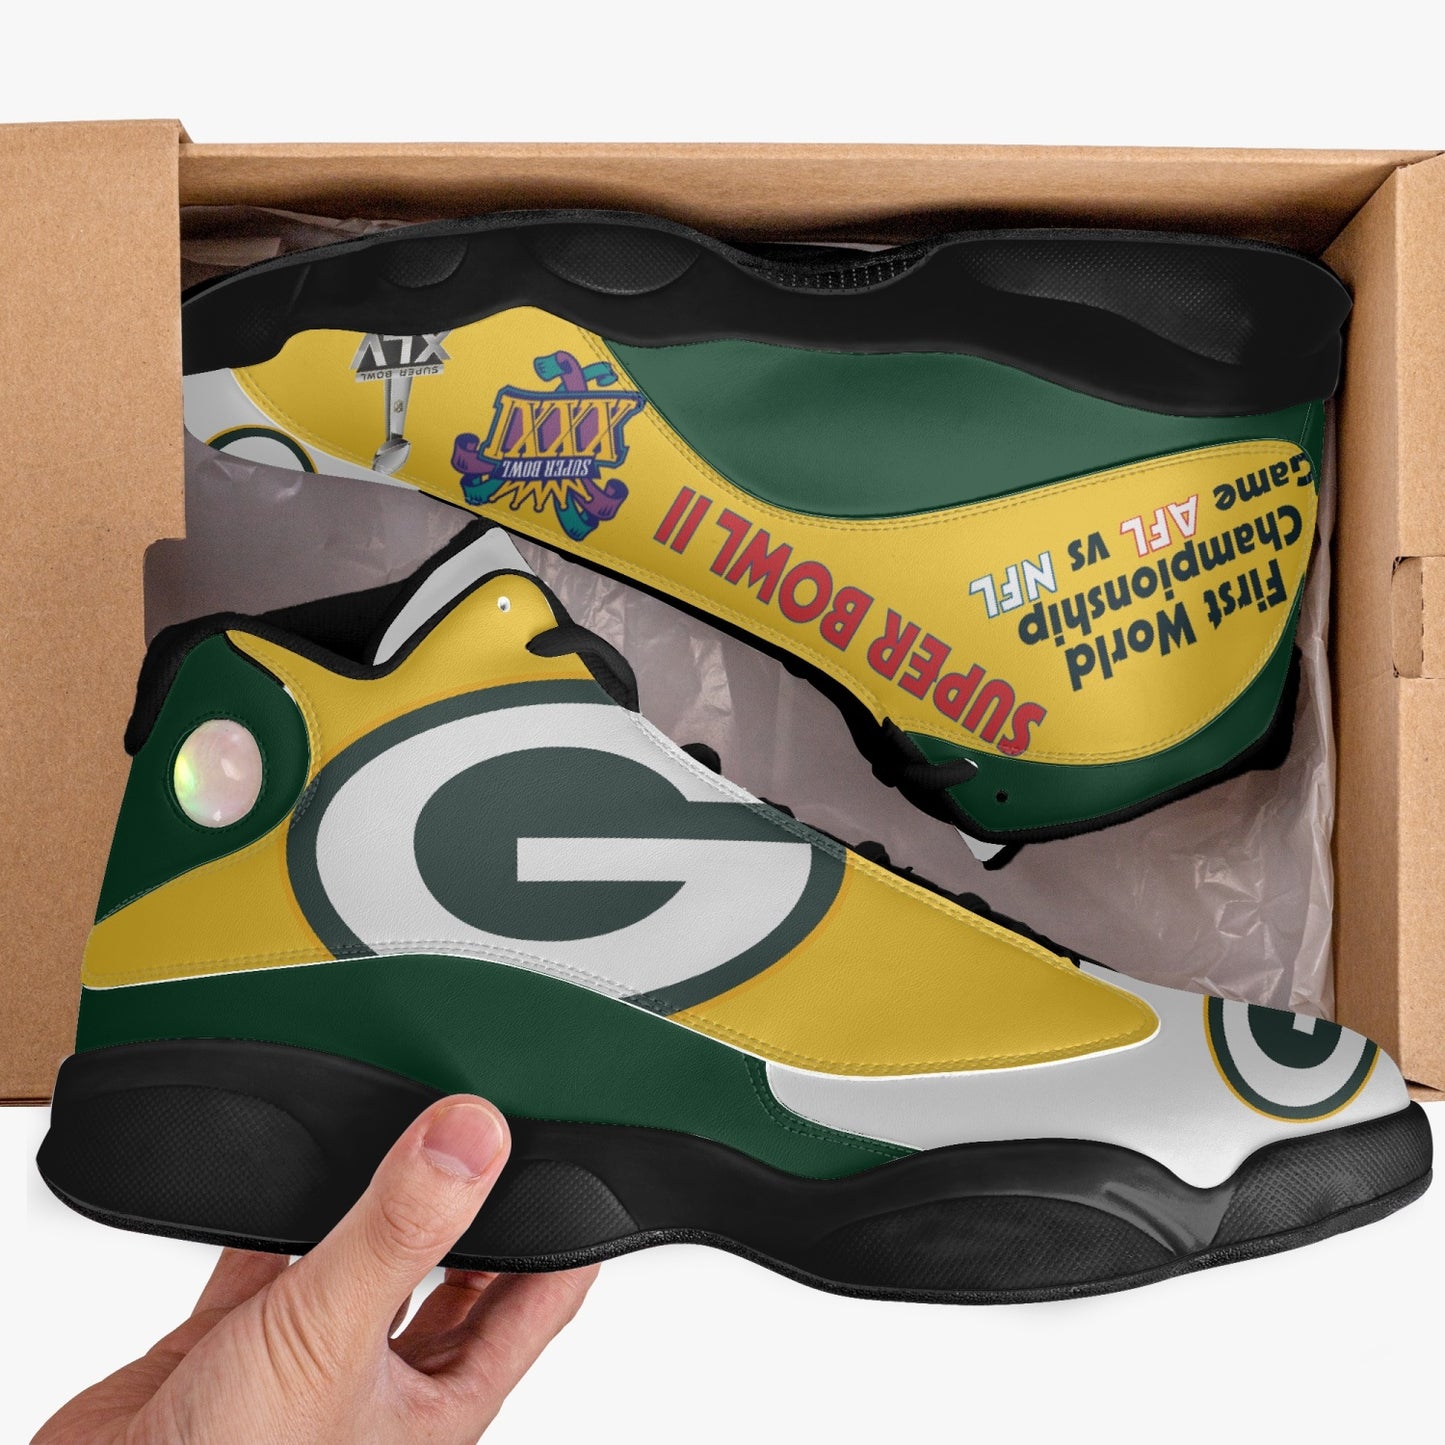 Green Bay Title Town Edition "White Toe" Sneakers - Green/Gold/White/Black